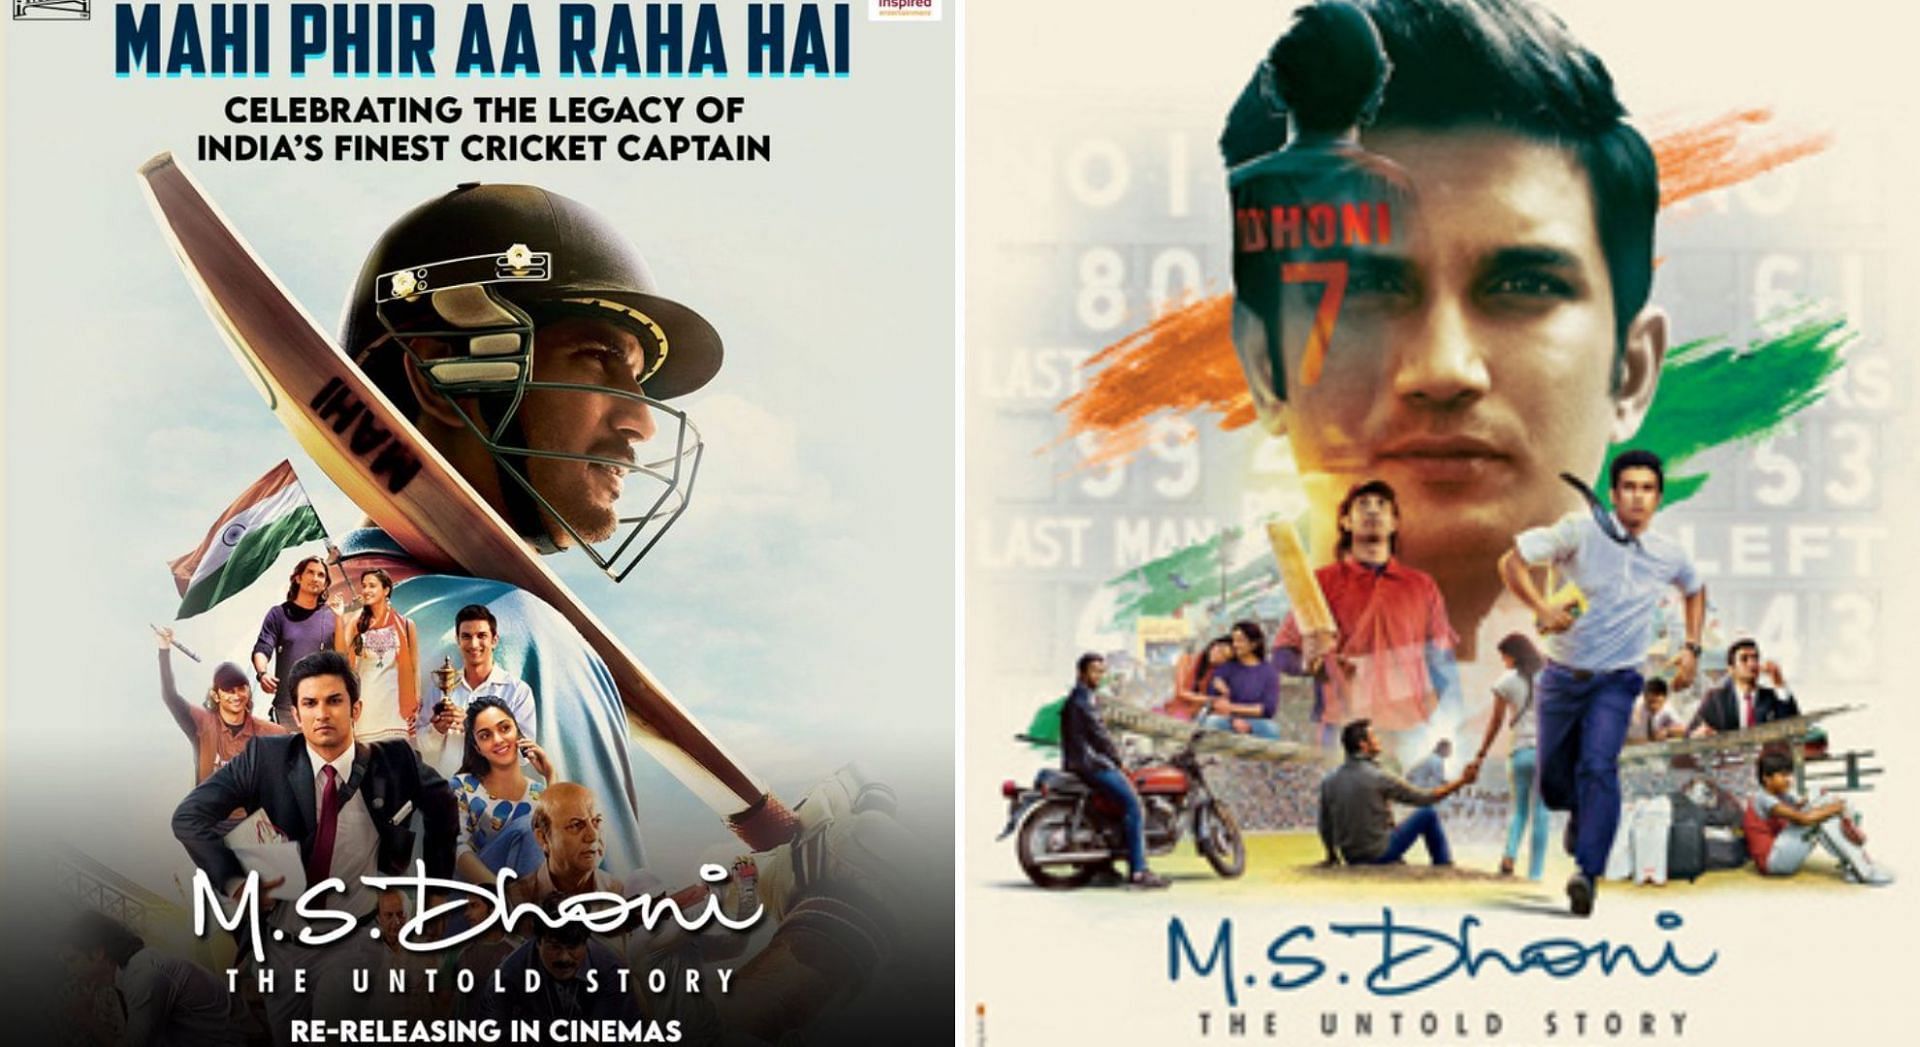 MS Dhoni: The Untold Story set to re-release in theatres again after more than 5 years